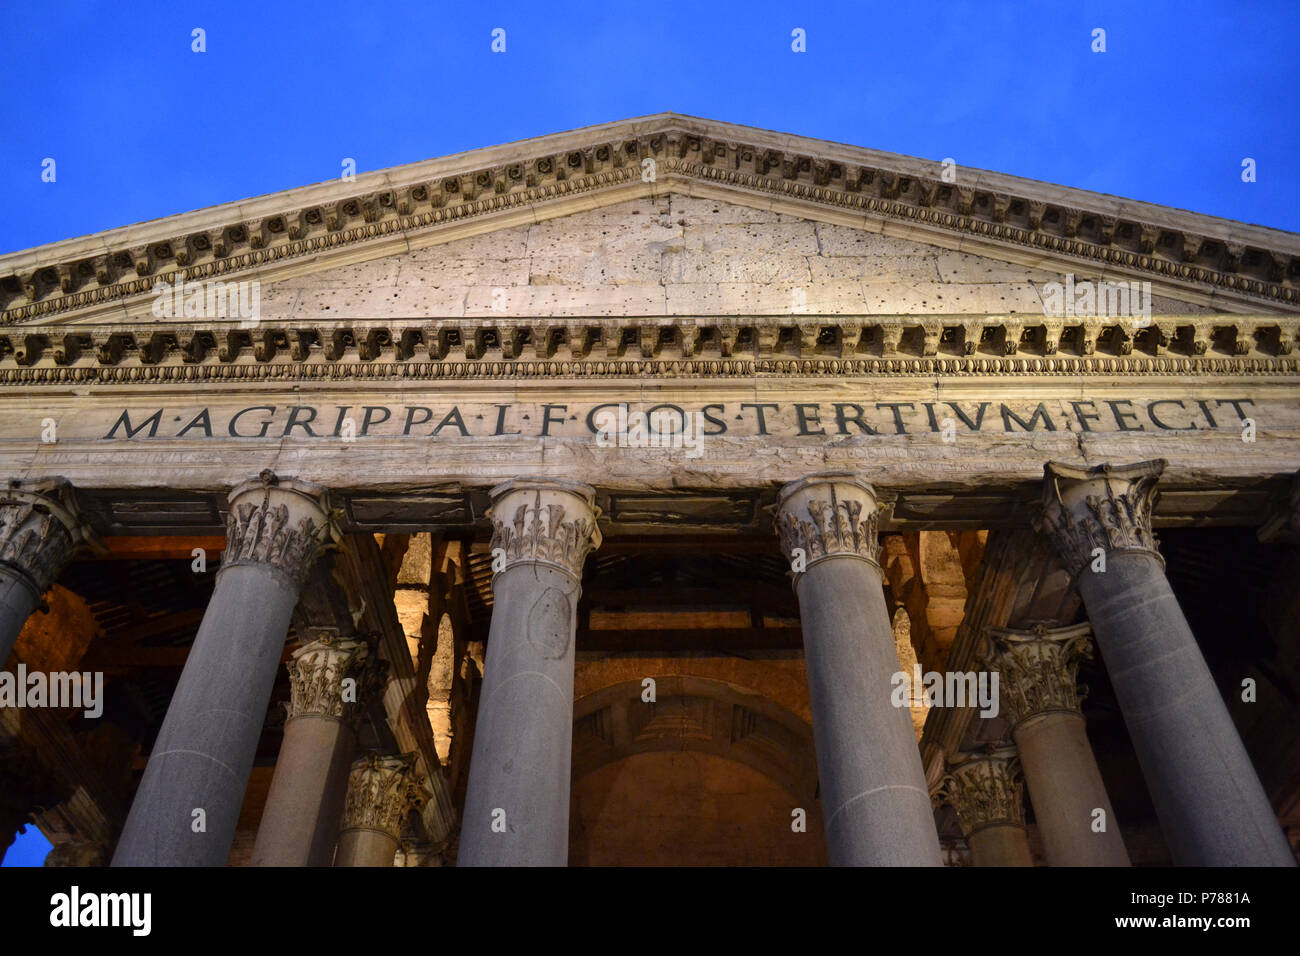 Close up of inscription on the Roman Pantheon proclaiming “It was built by Marcos Agrippa in his third consulate”, Rome, Italy Stock Photo